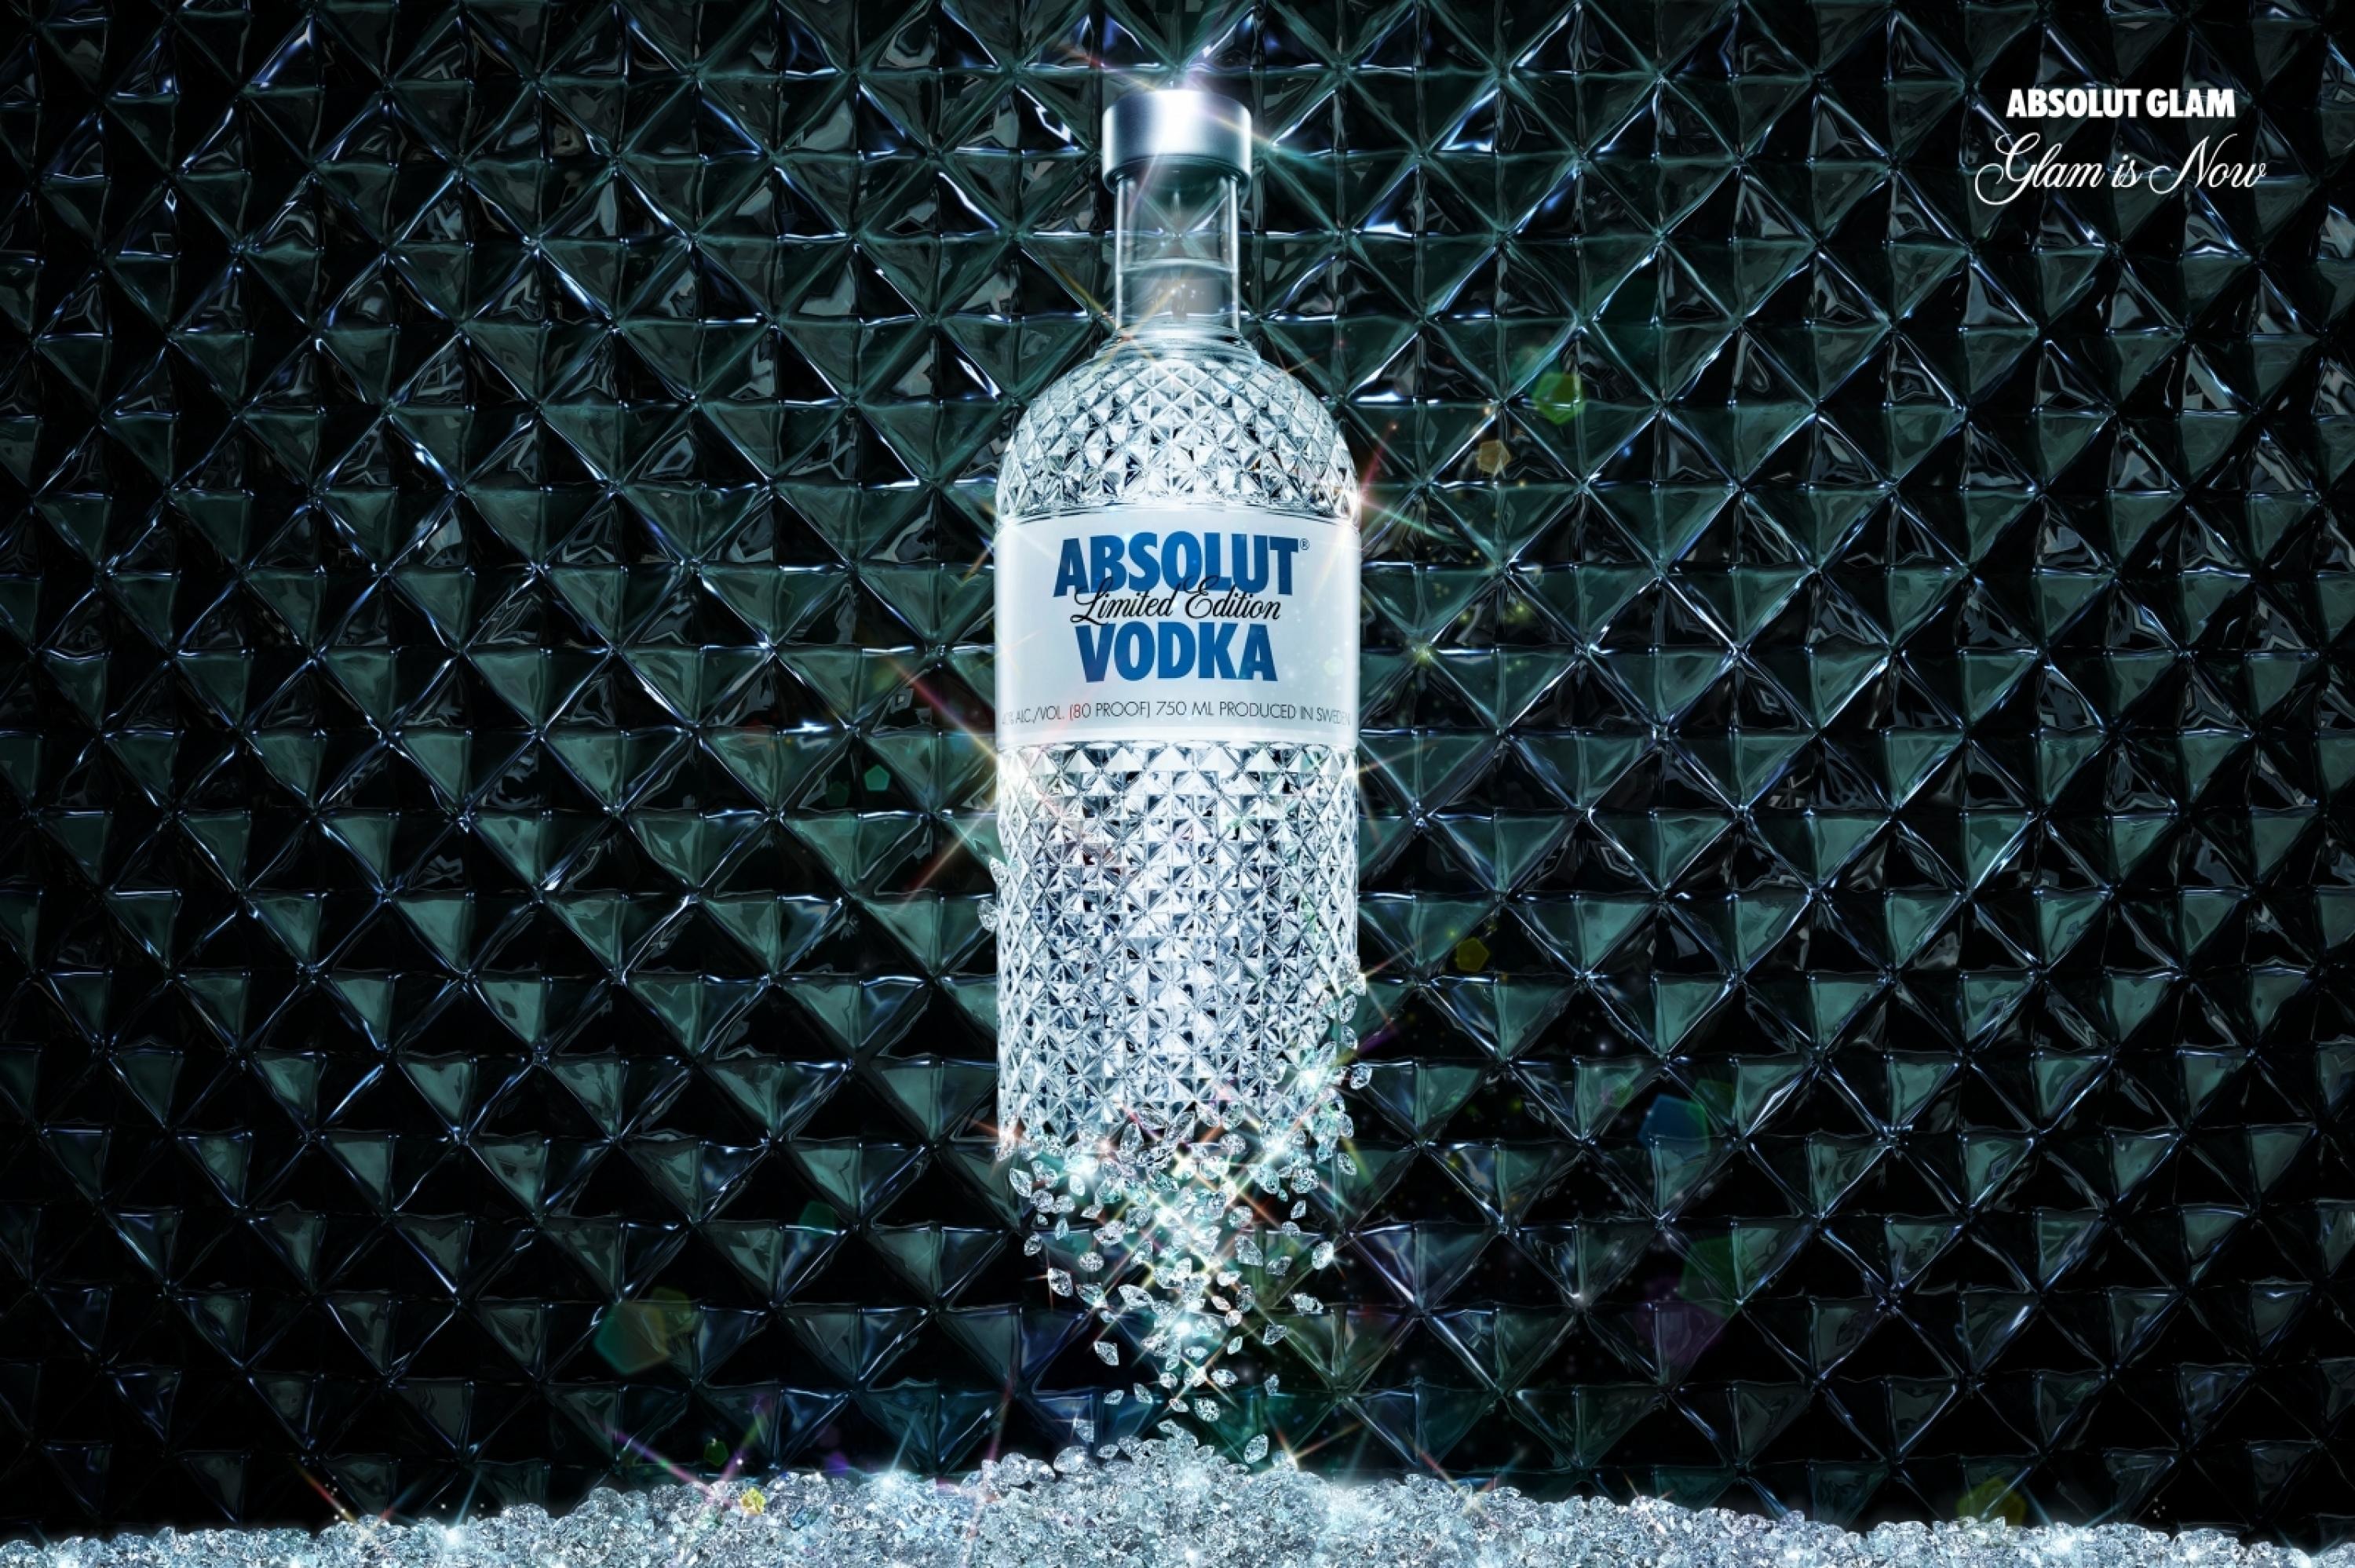 ABSOLUT GLAM